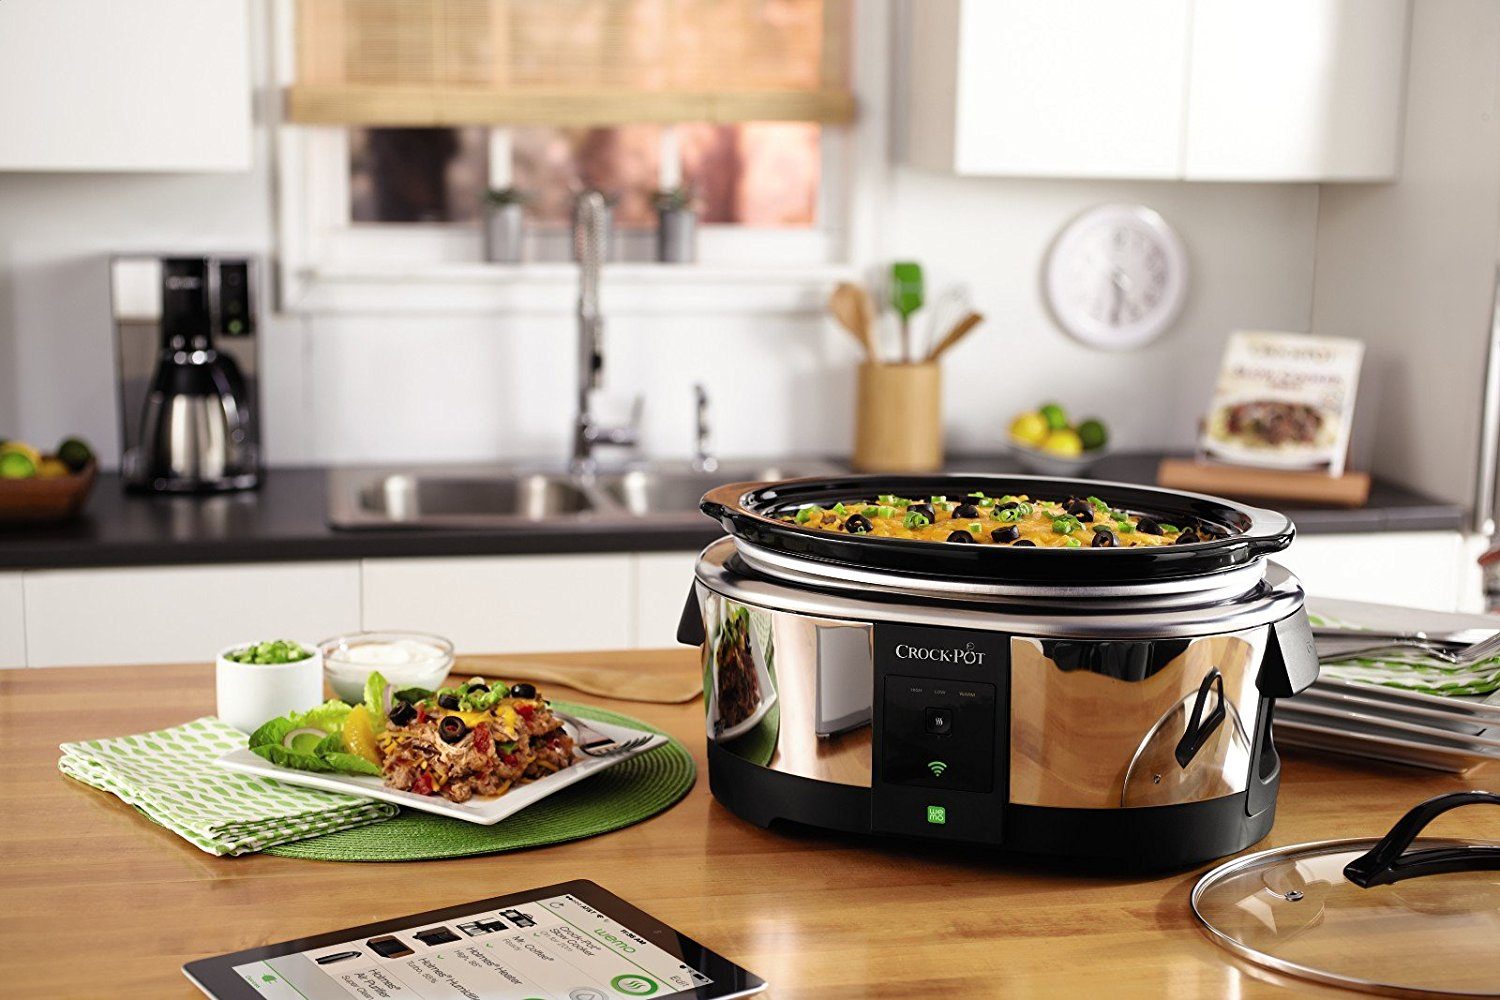 Best Aroma Rice Cooker 4 Cup for sale in Ann Arbor, Michigan for 2023